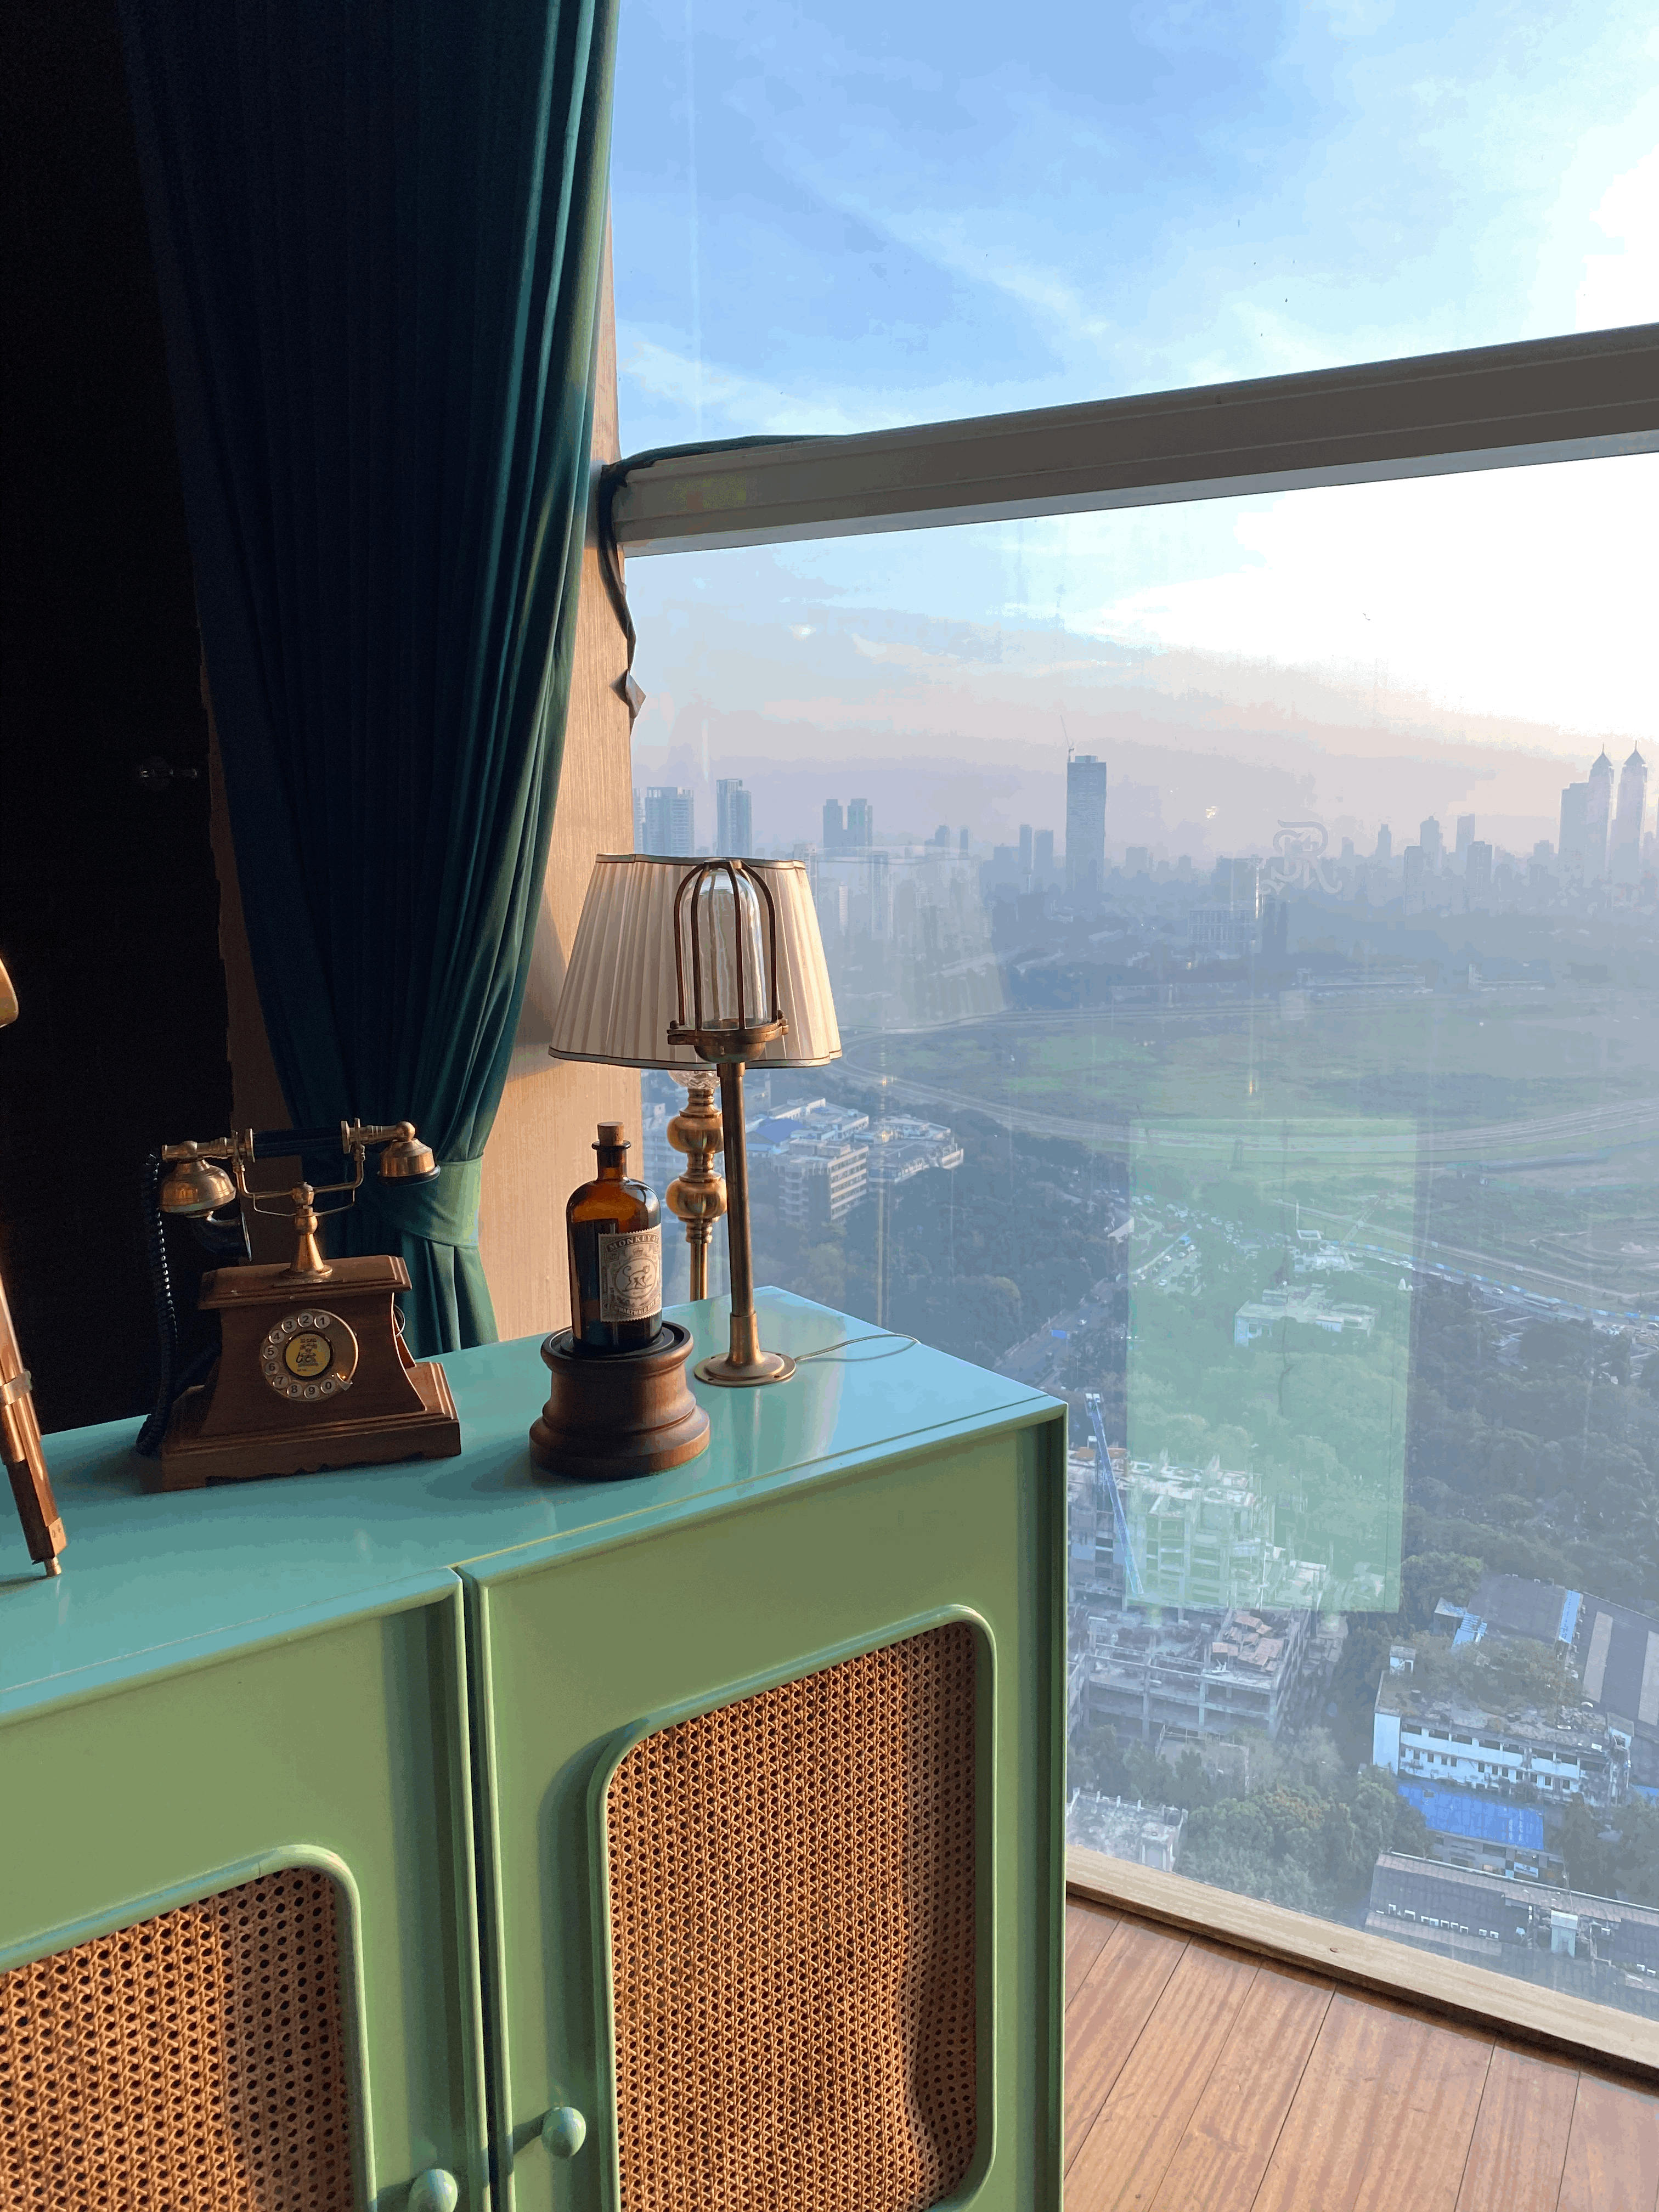 Quick Review: My Staycation at St. Regis, Mumbai